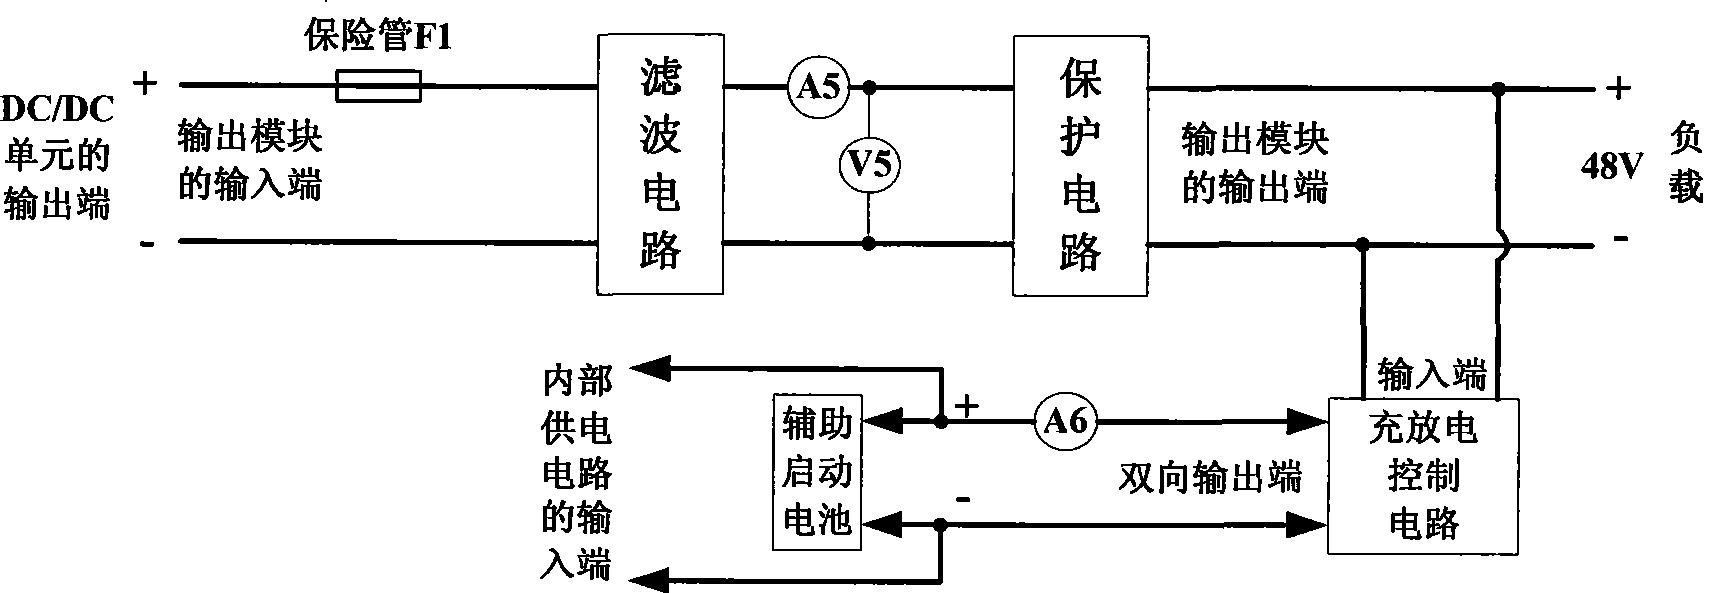 Standby electrical power system of fuel cell for communication